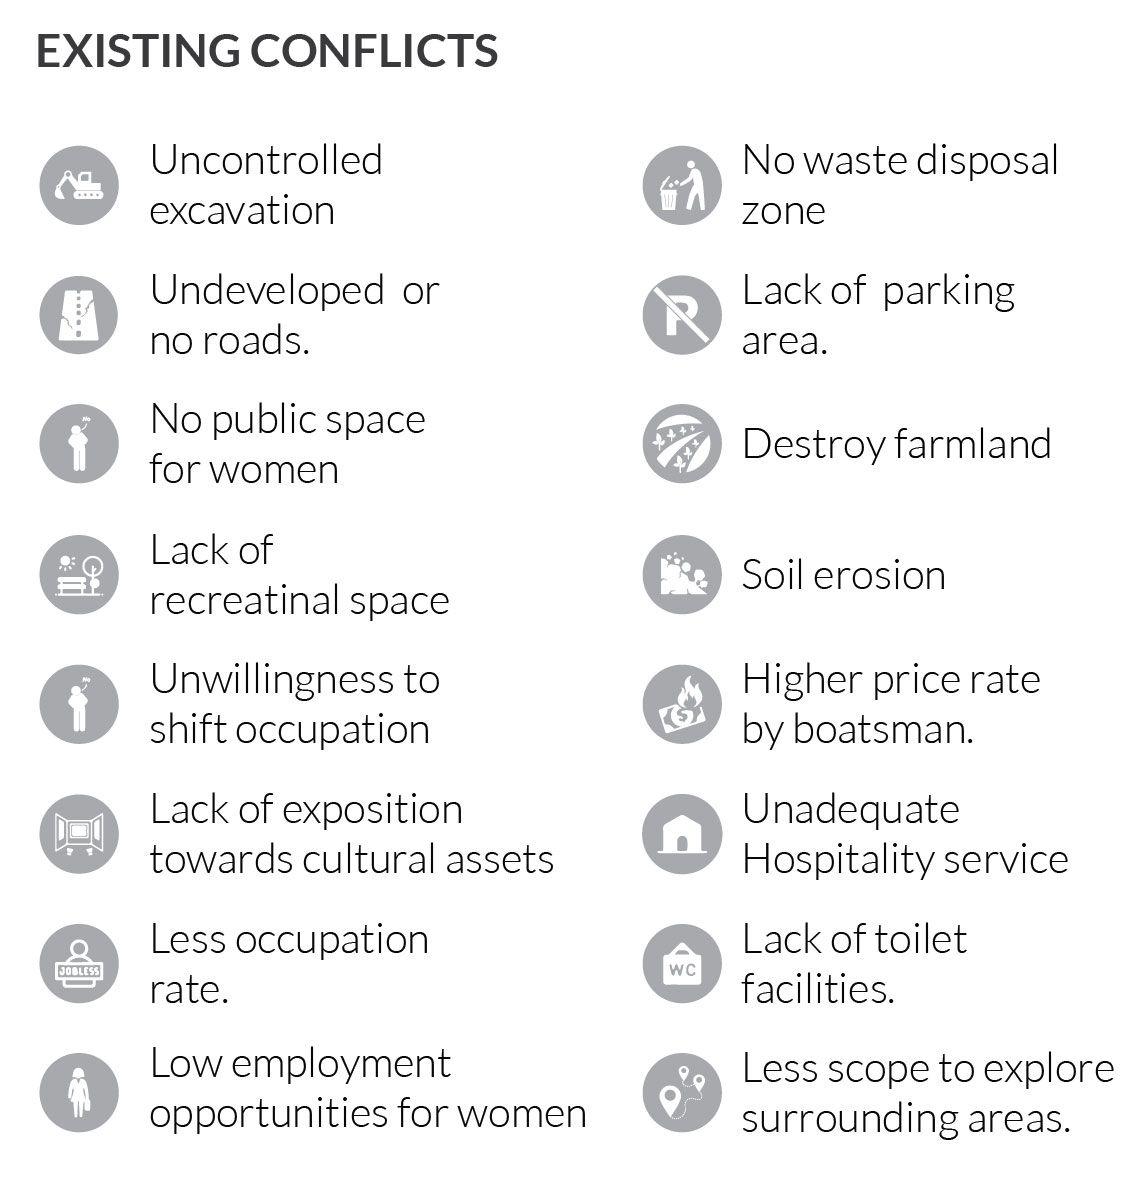 Existing Conflicts